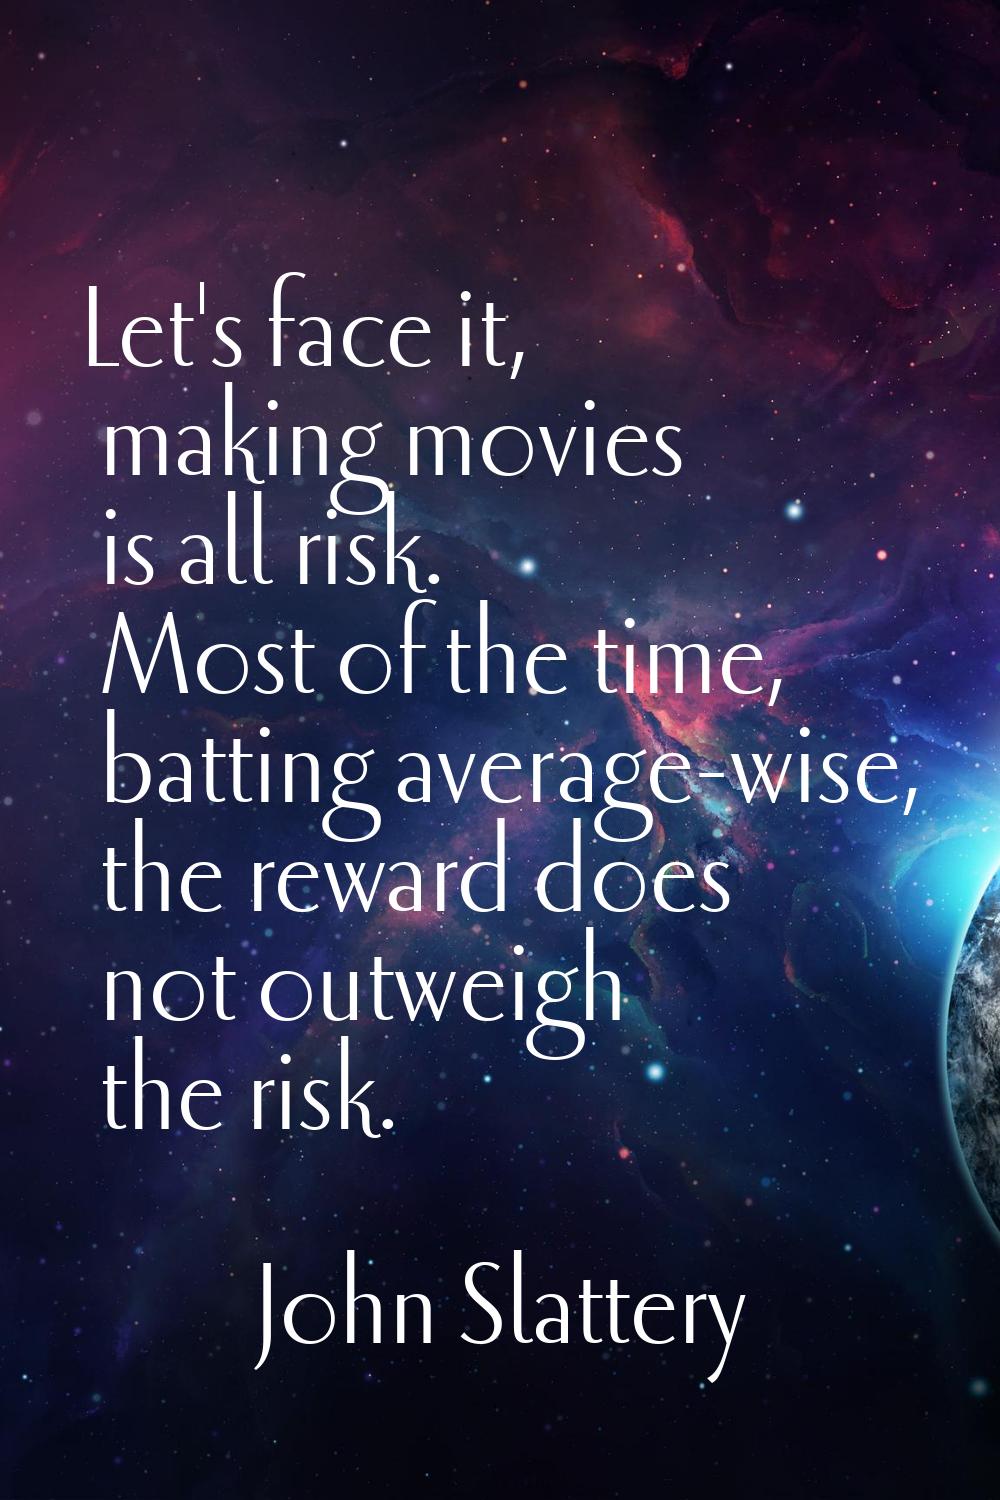 Let's face it, making movies is all risk. Most of the time, batting average-wise, the reward does n